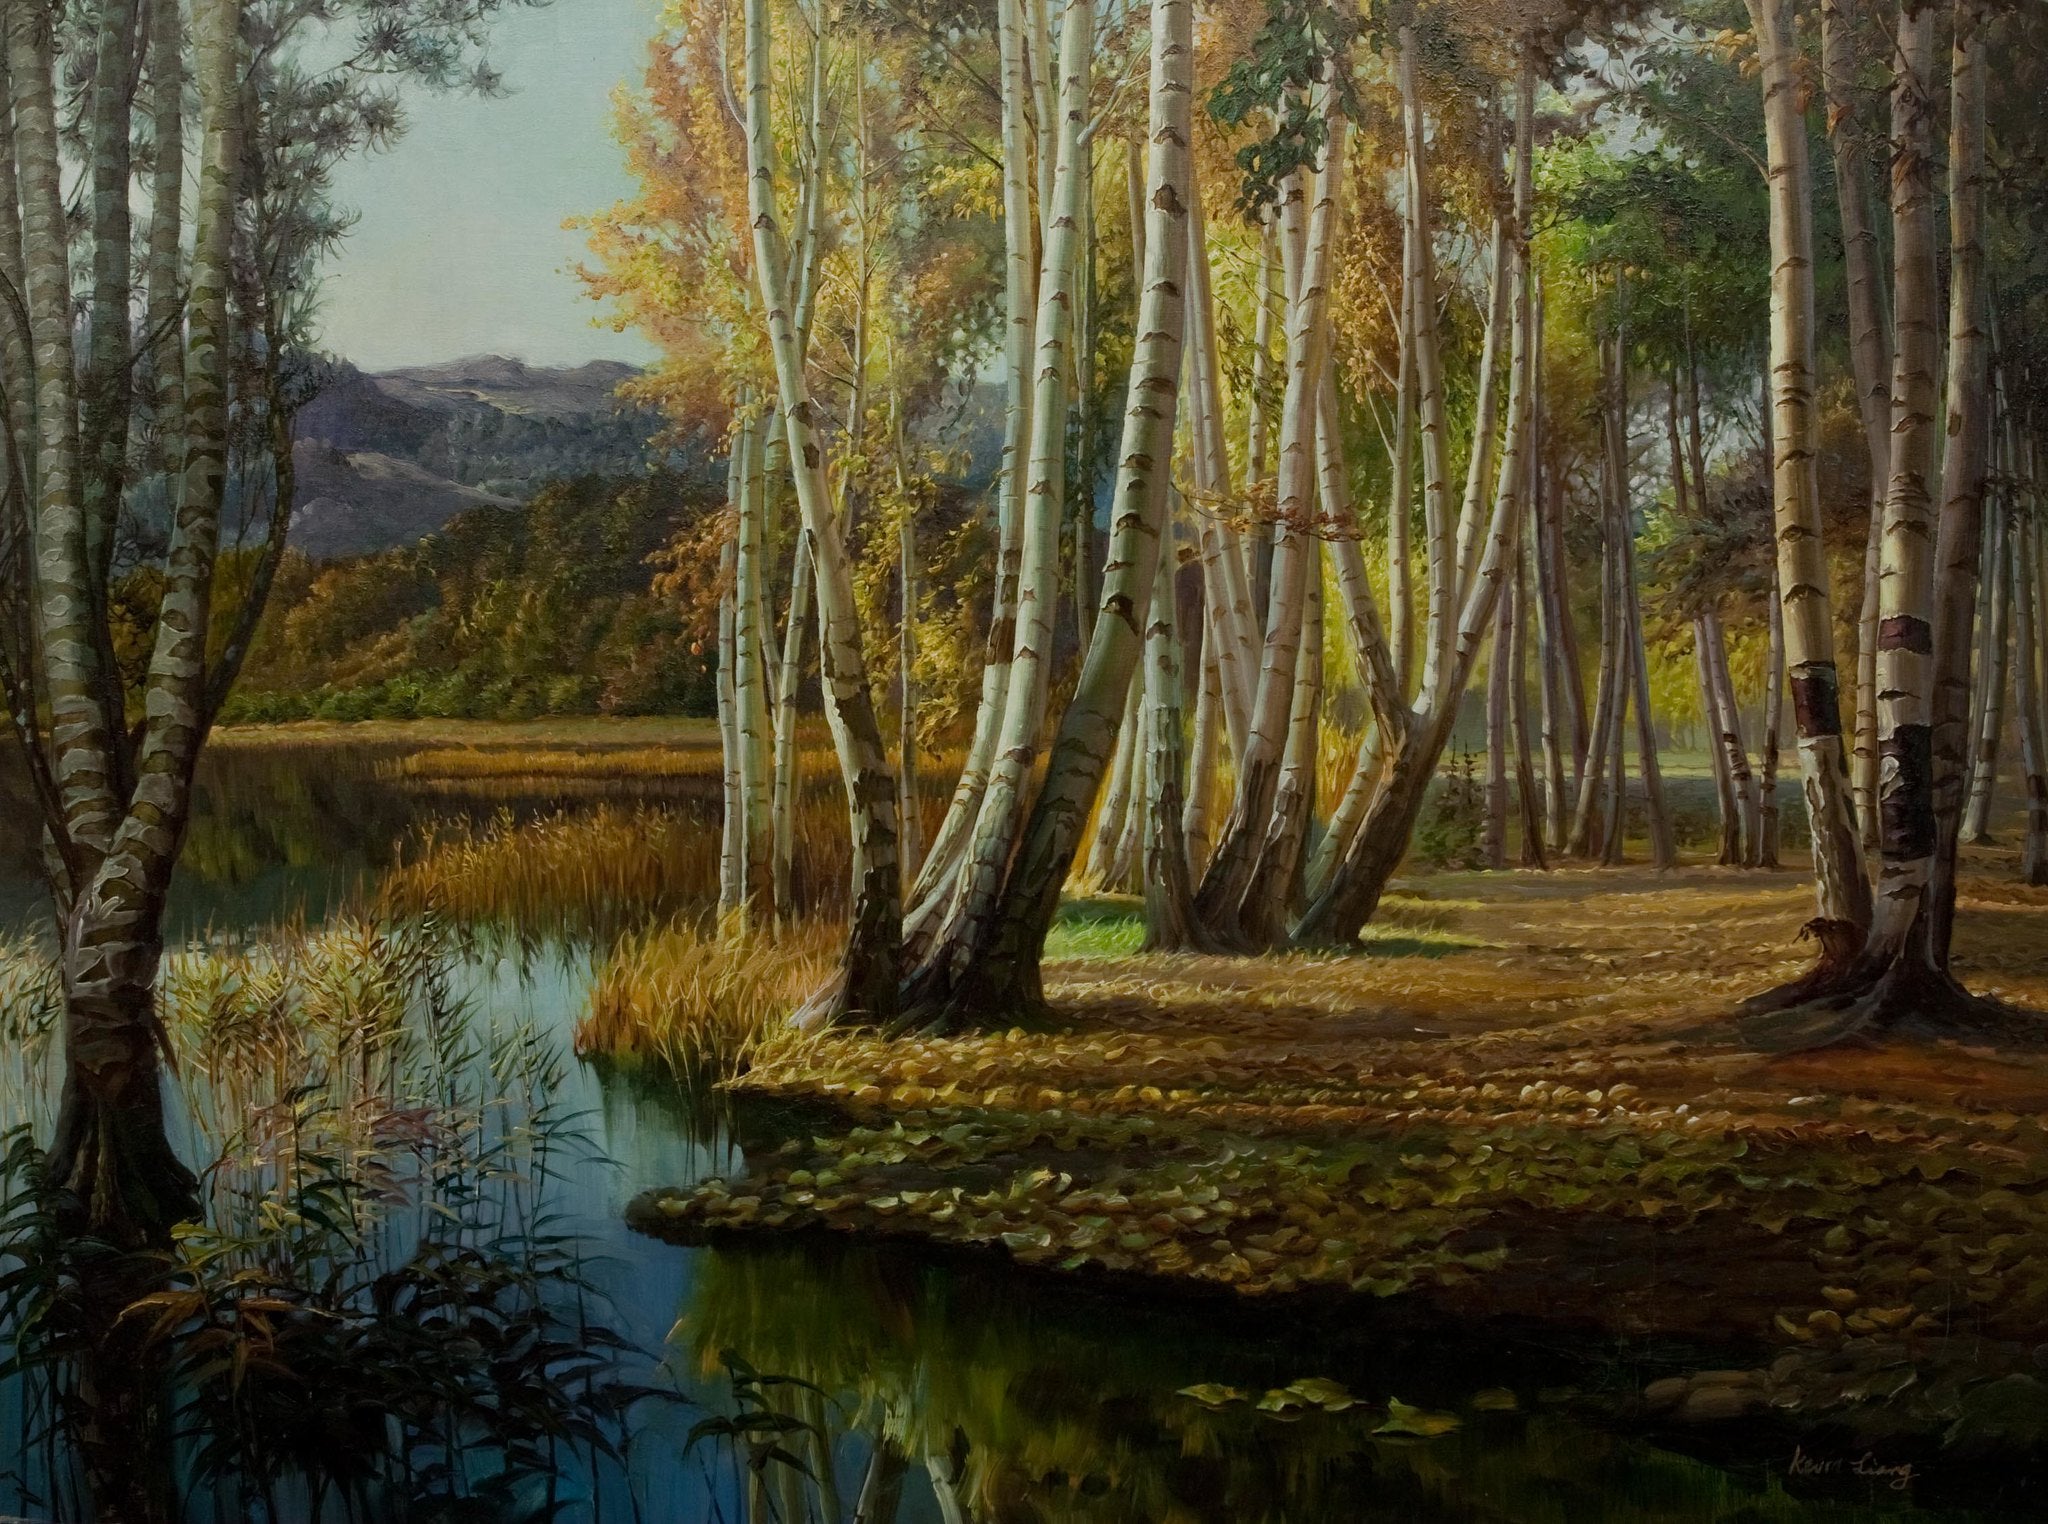 "Autumn Reflection"  Kevin Liang 2005  Original oil on canvas with frame 36" x 46".by Kevin Liang